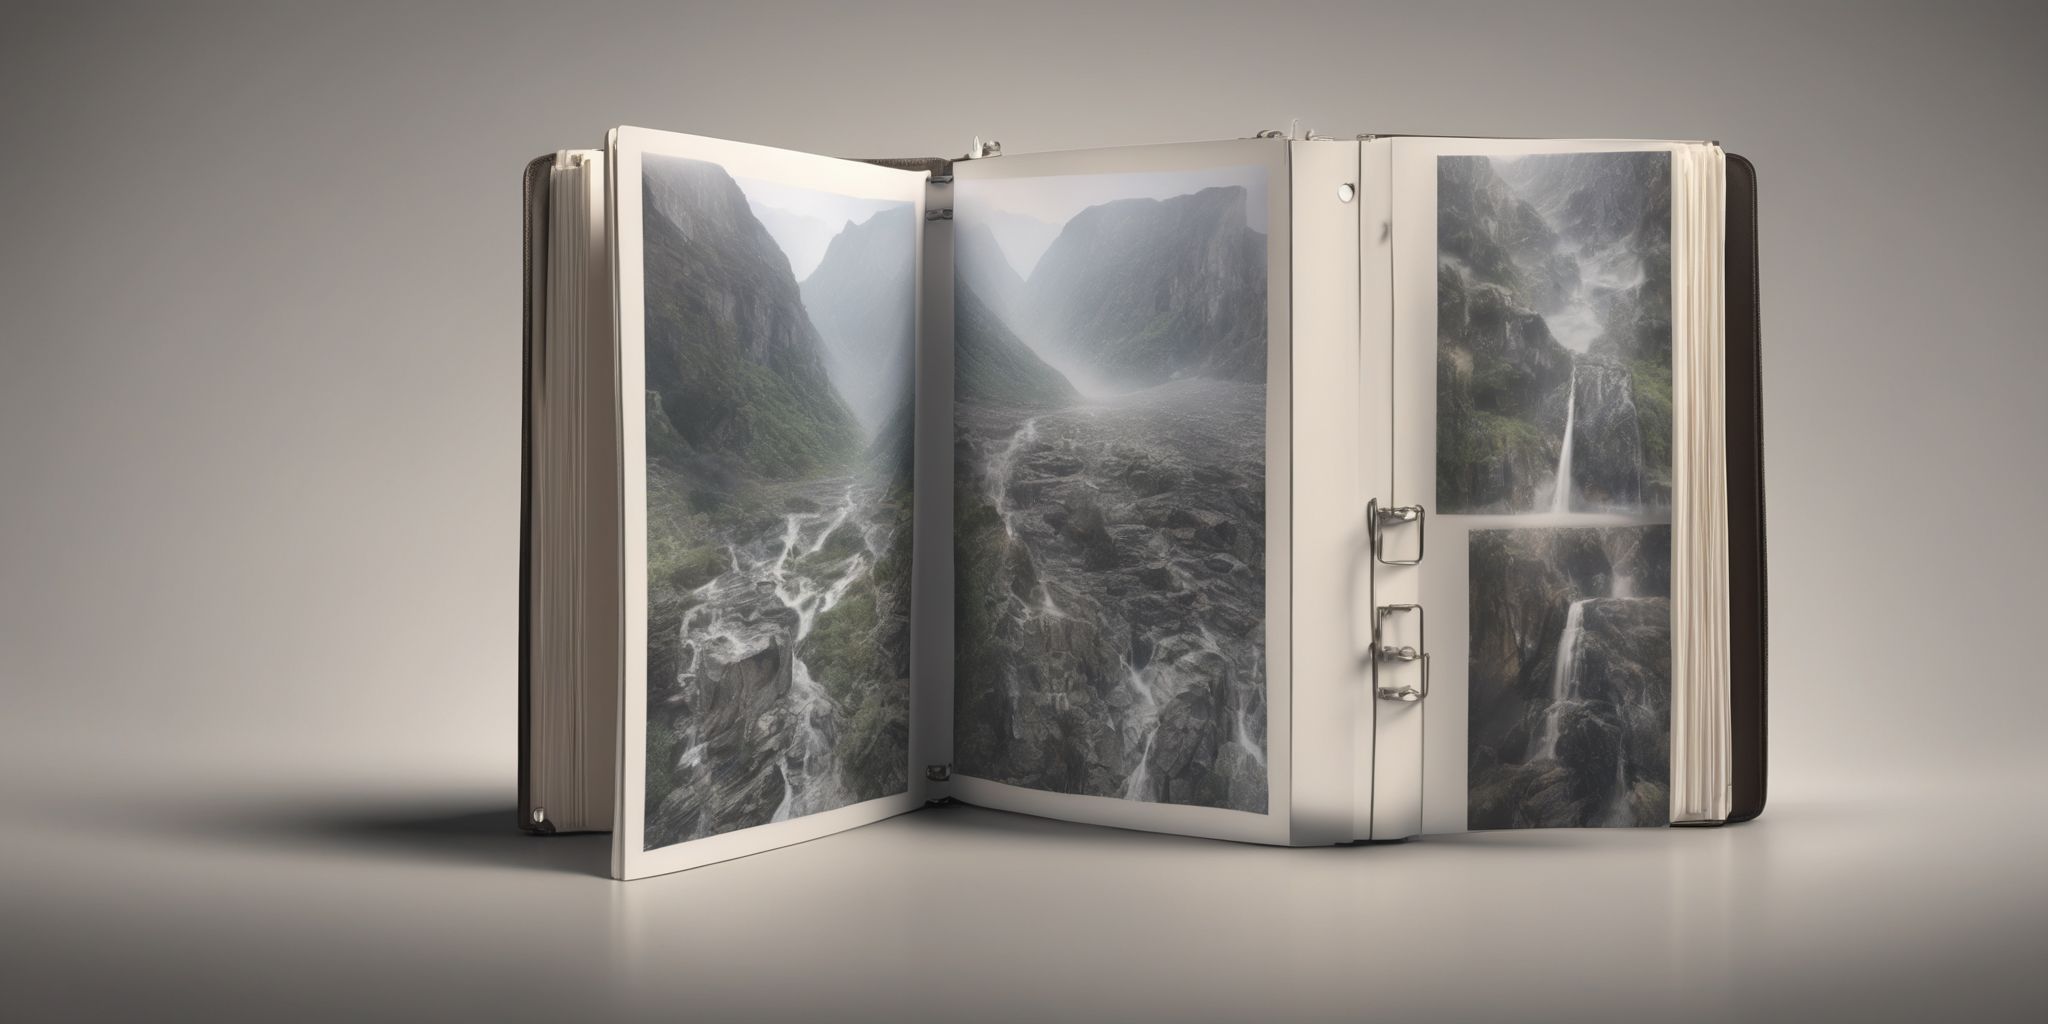 Binder  in realistic, photographic style